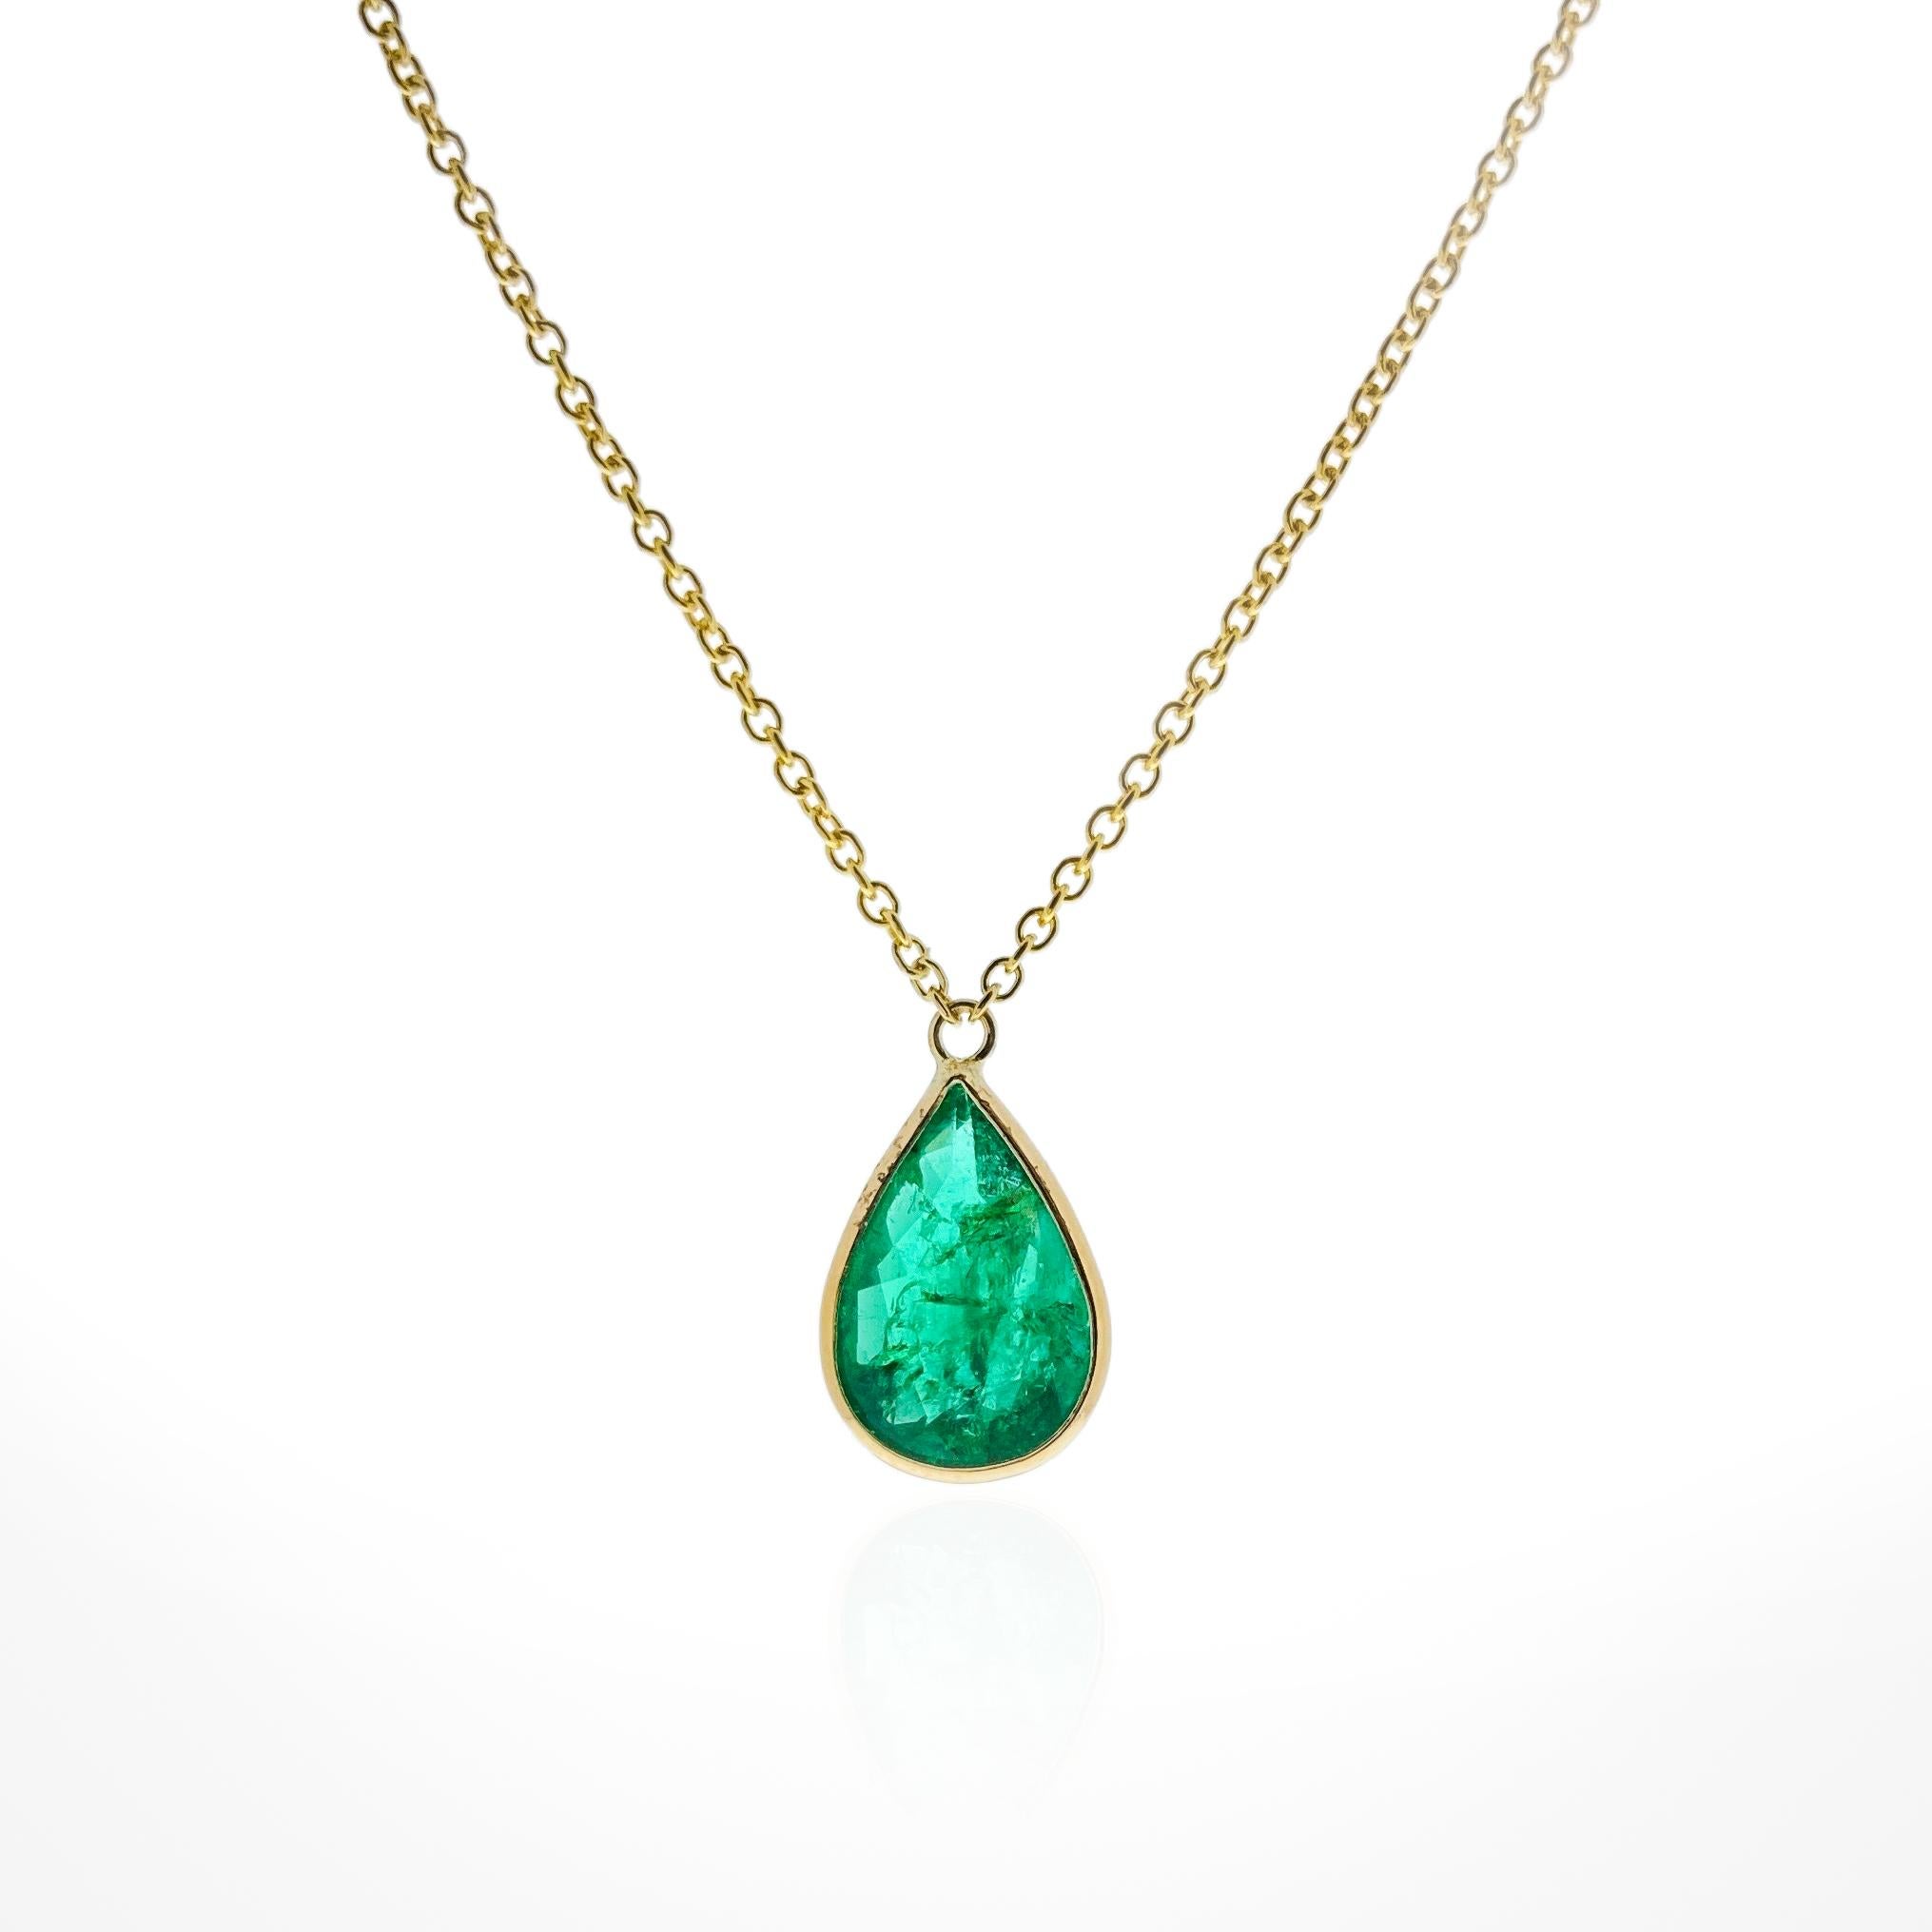 Pear Cut 1.91 Carat Green Emerald Pear Shape Fashion Necklaces In 14K Yellow Gold For Sale